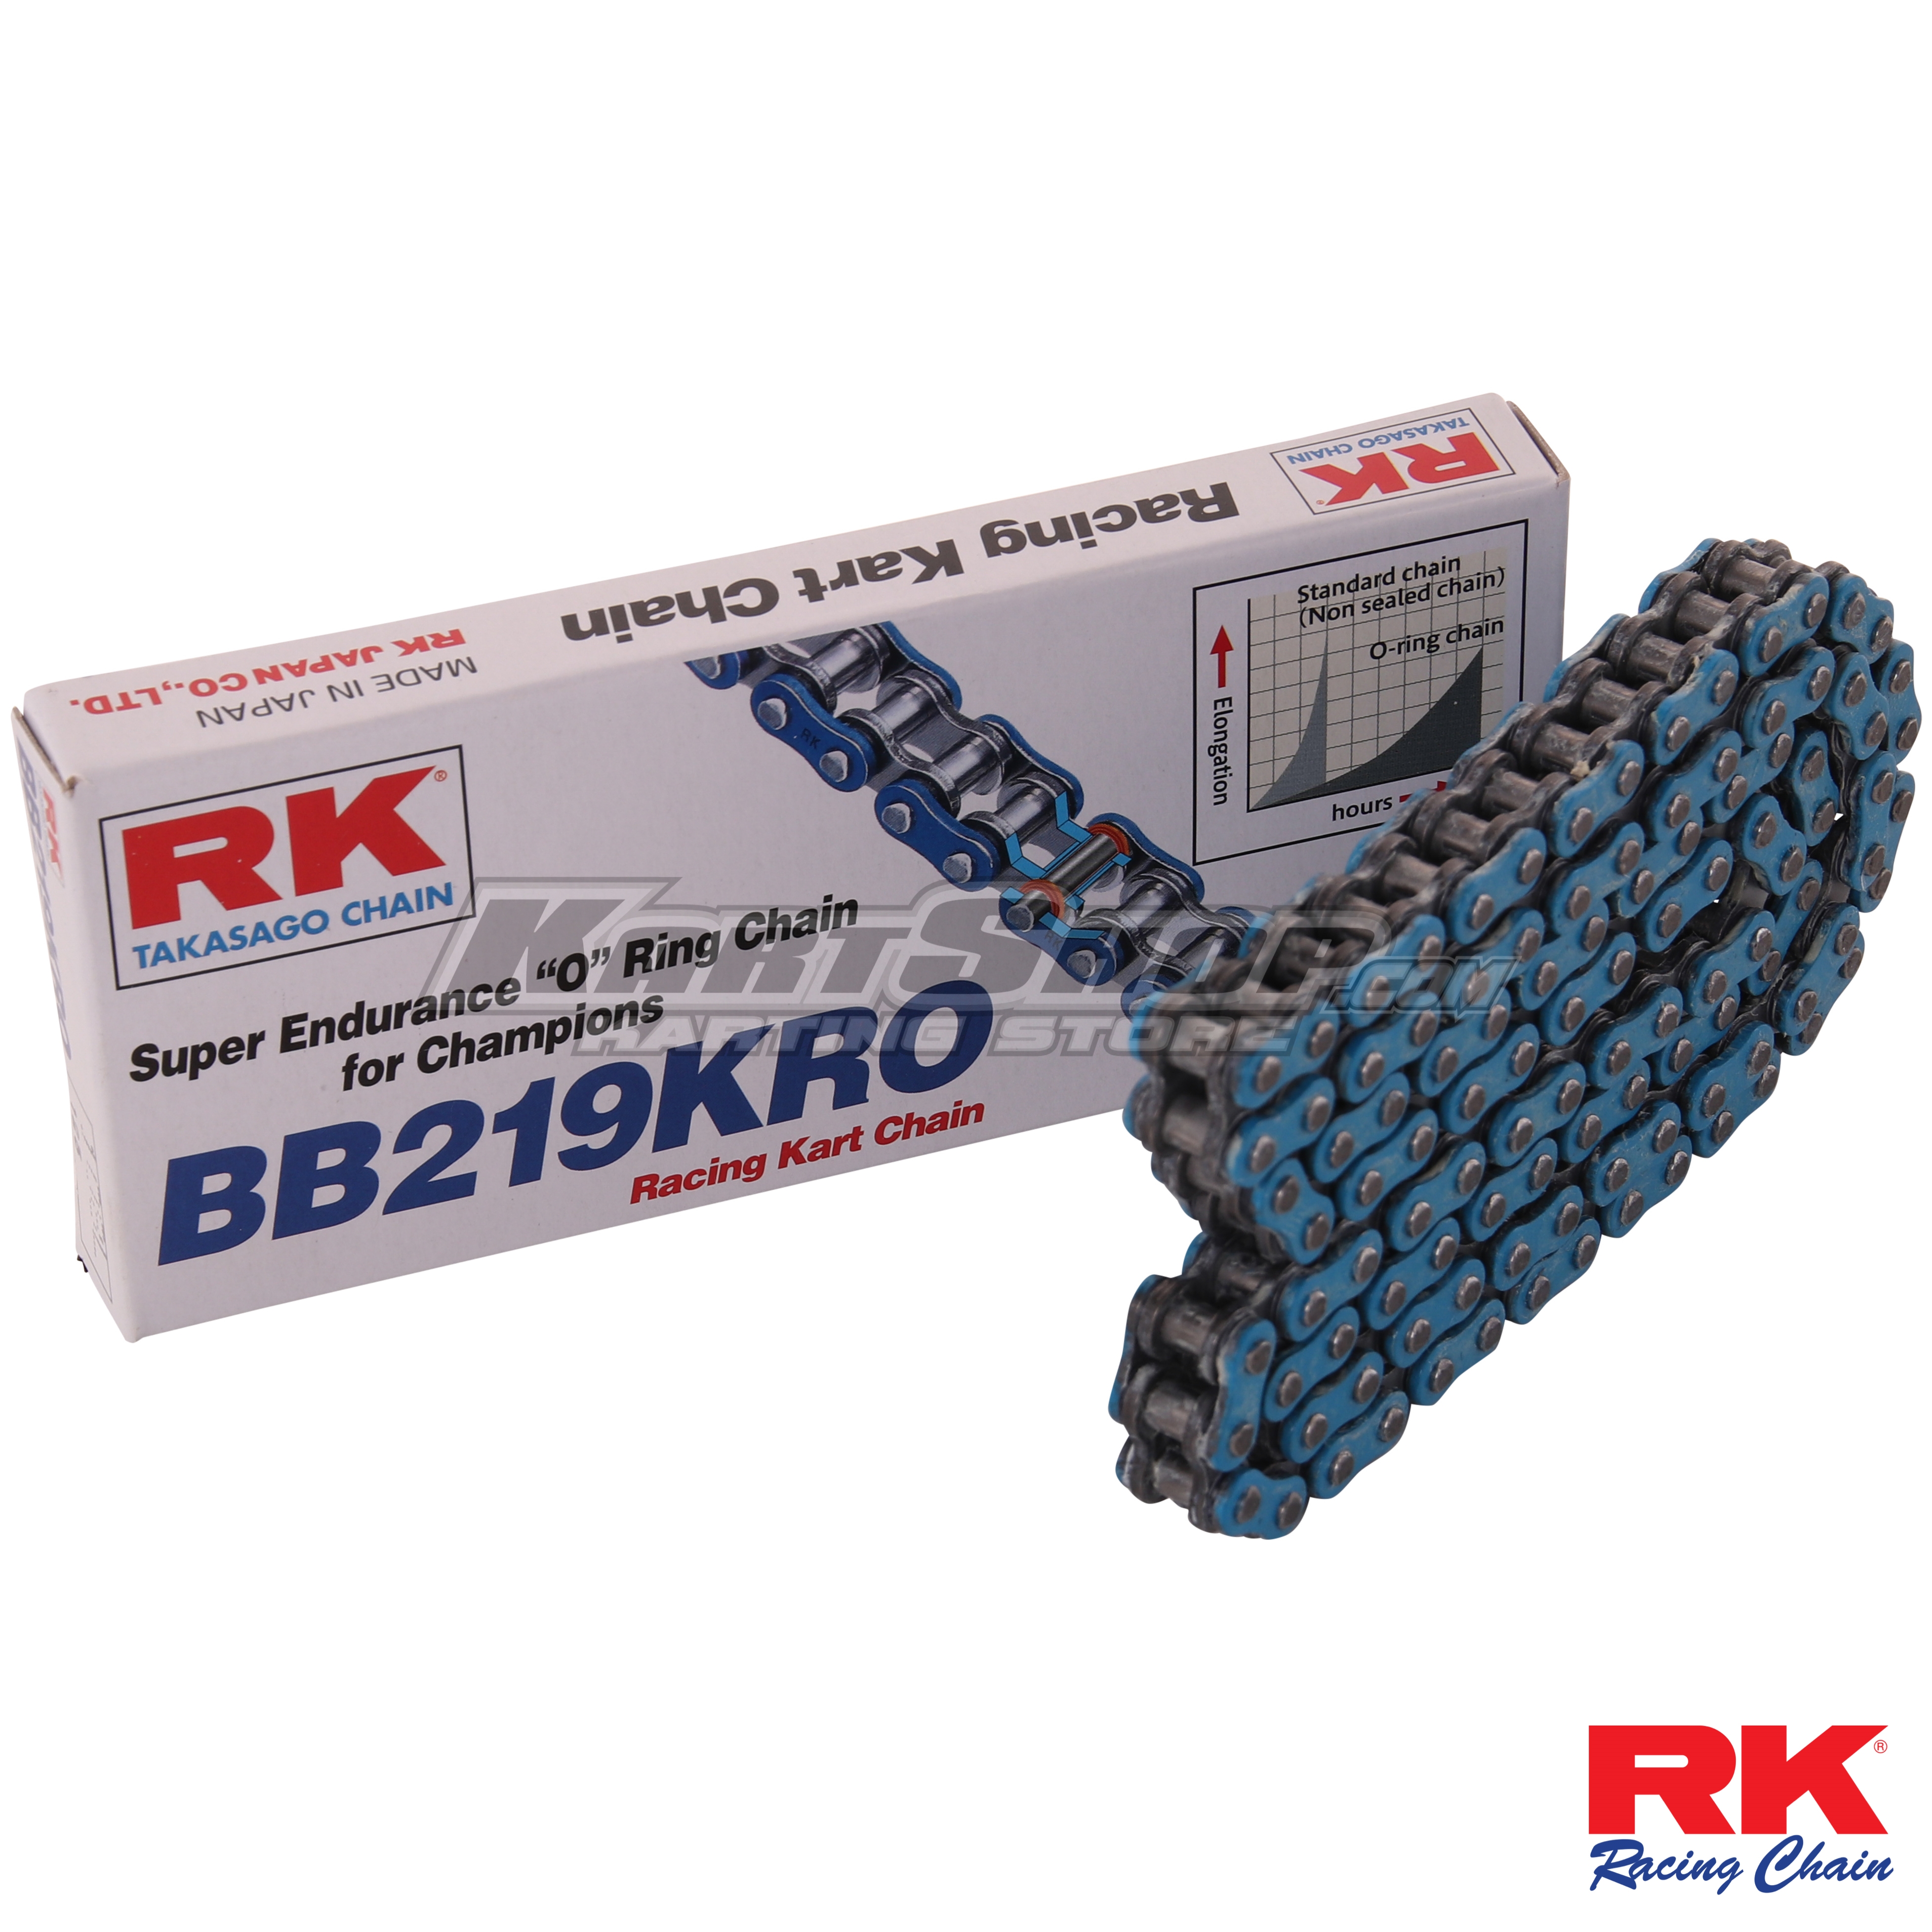 RK o-ring chain with 102 links